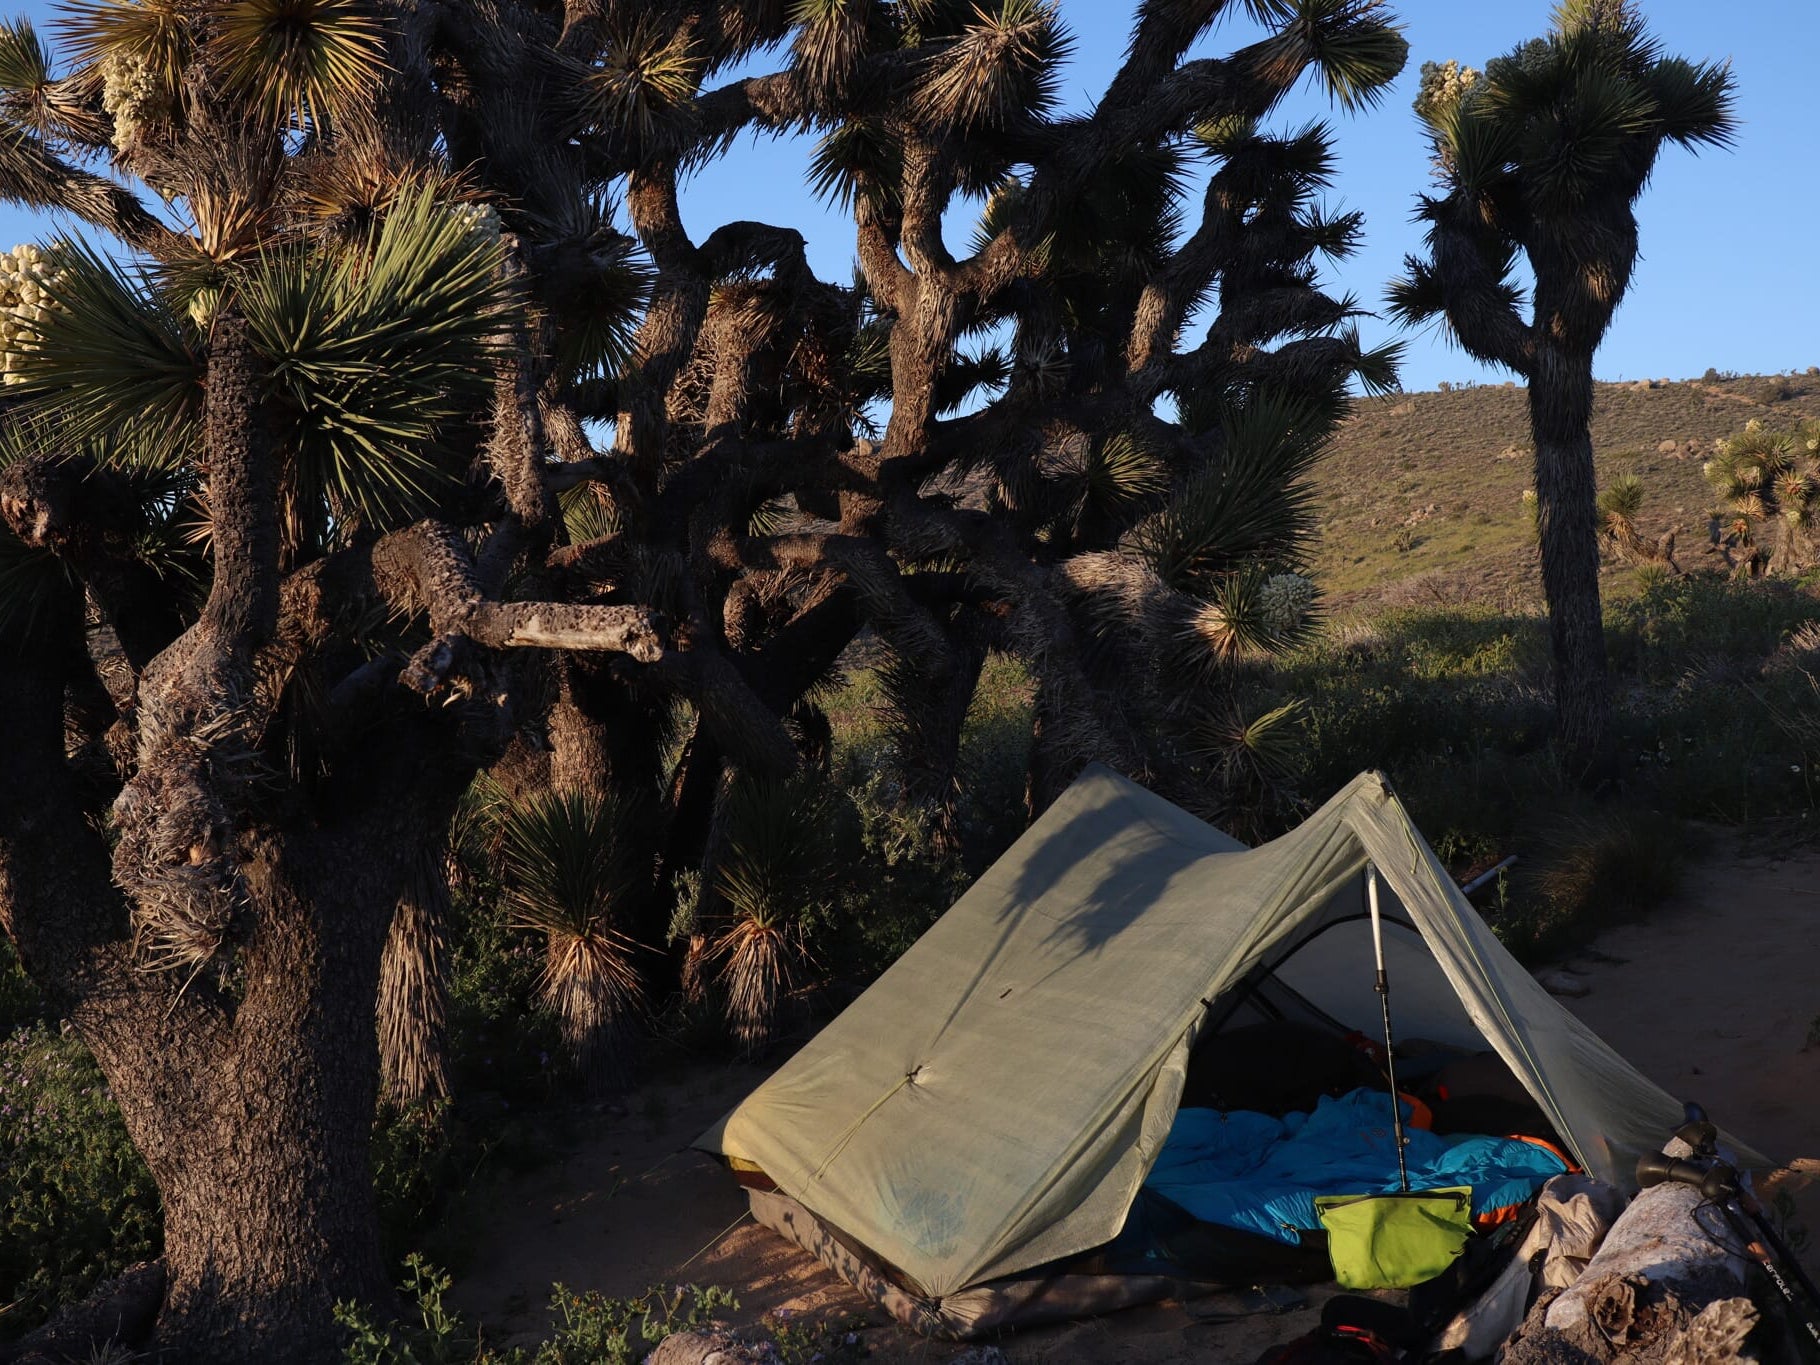 Joshua Trees, Kernville, and Deciding on the Sierras